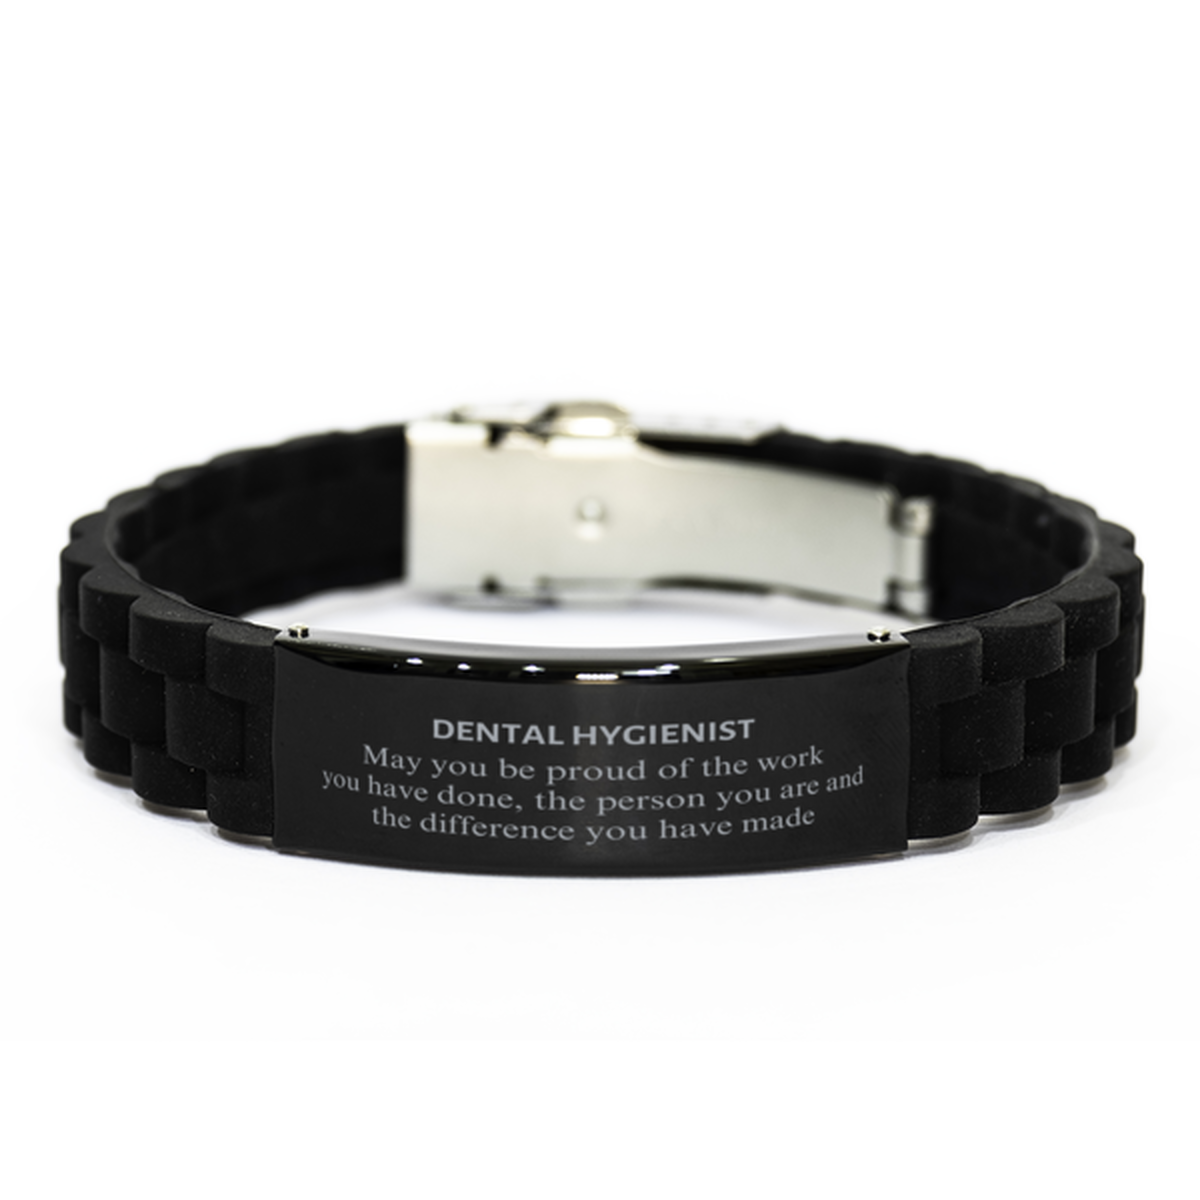 Dental Hygienist May you be proud of the work you have done, Retirement Dental Hygienist Black Glidelock Clasp Bracelet for Colleague Appreciation Gifts Amazing for Dental Hygienist